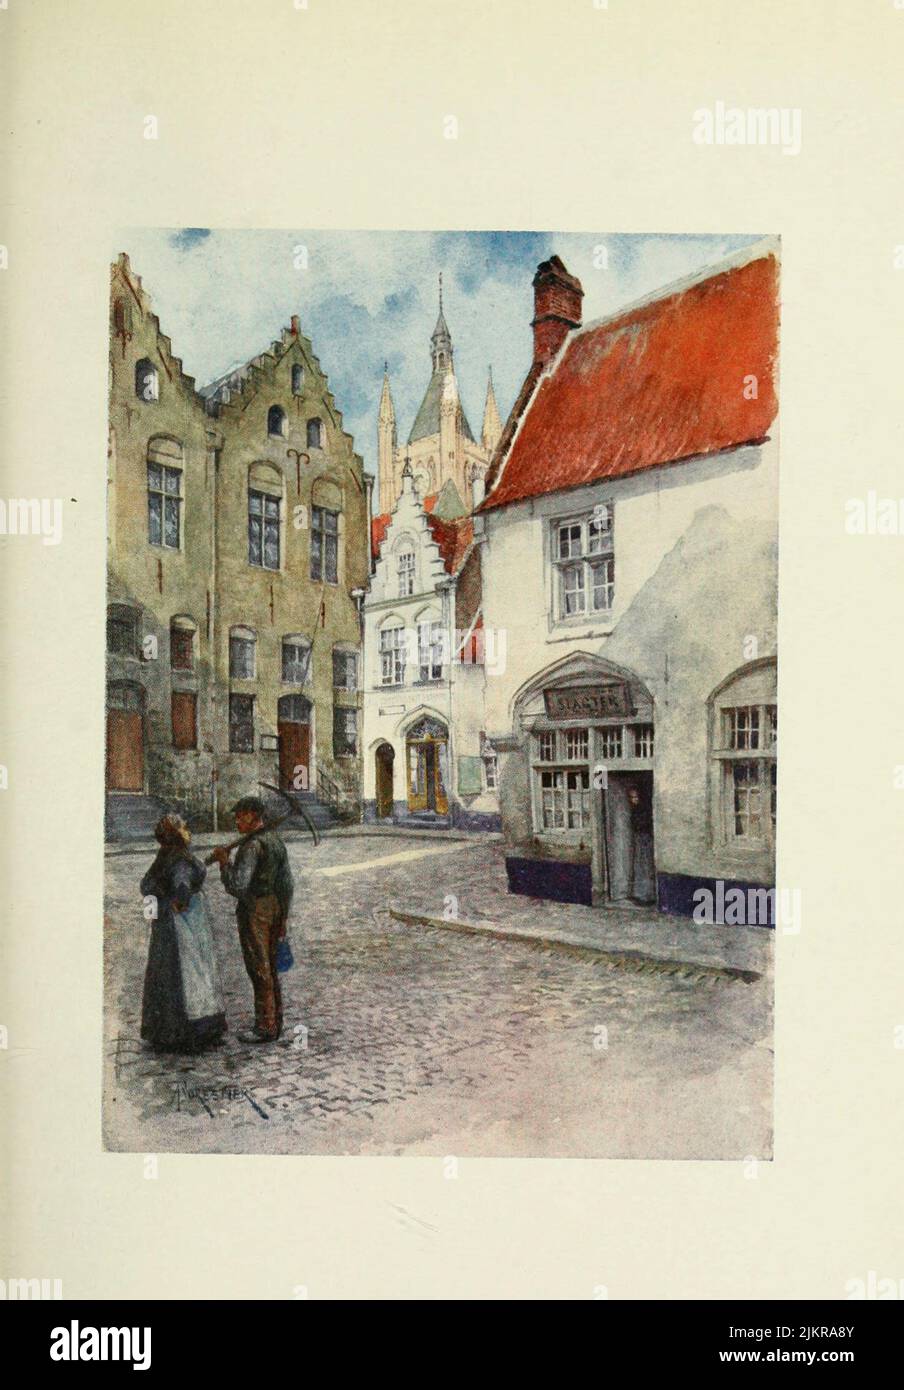 Ypres : Place du Musée (showing Top Part of the Belfry) Painted by Amedee Forestier, from the book '  Bruges and West Flanders ' by George William Thomson Omond, Publication date 1906 Publisher London : A. & C. Black Sir Amédée Forestier (Paris 1854 – 18 November 1930 London) was an Anglo-French artist and illustrator who specialised in historical and prehistoric scenes, and landscapes. Stock Photo